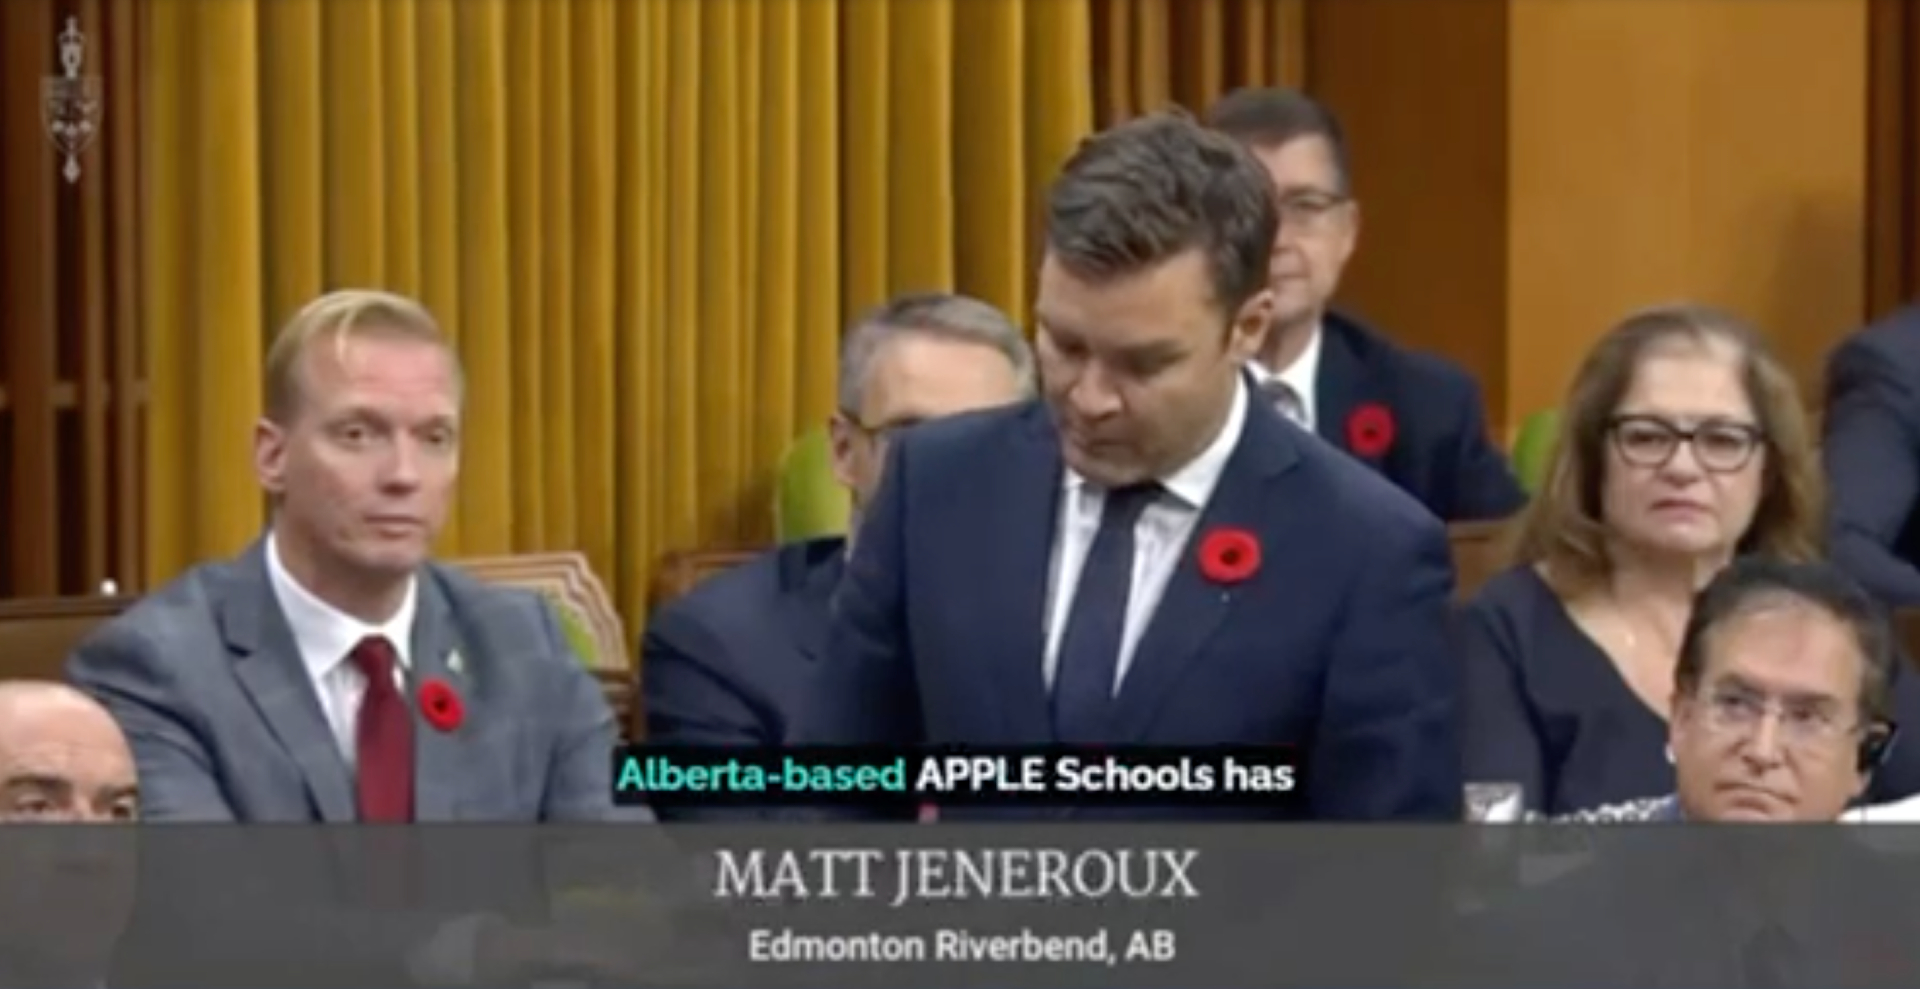 APPLE Schools in the House of Commons